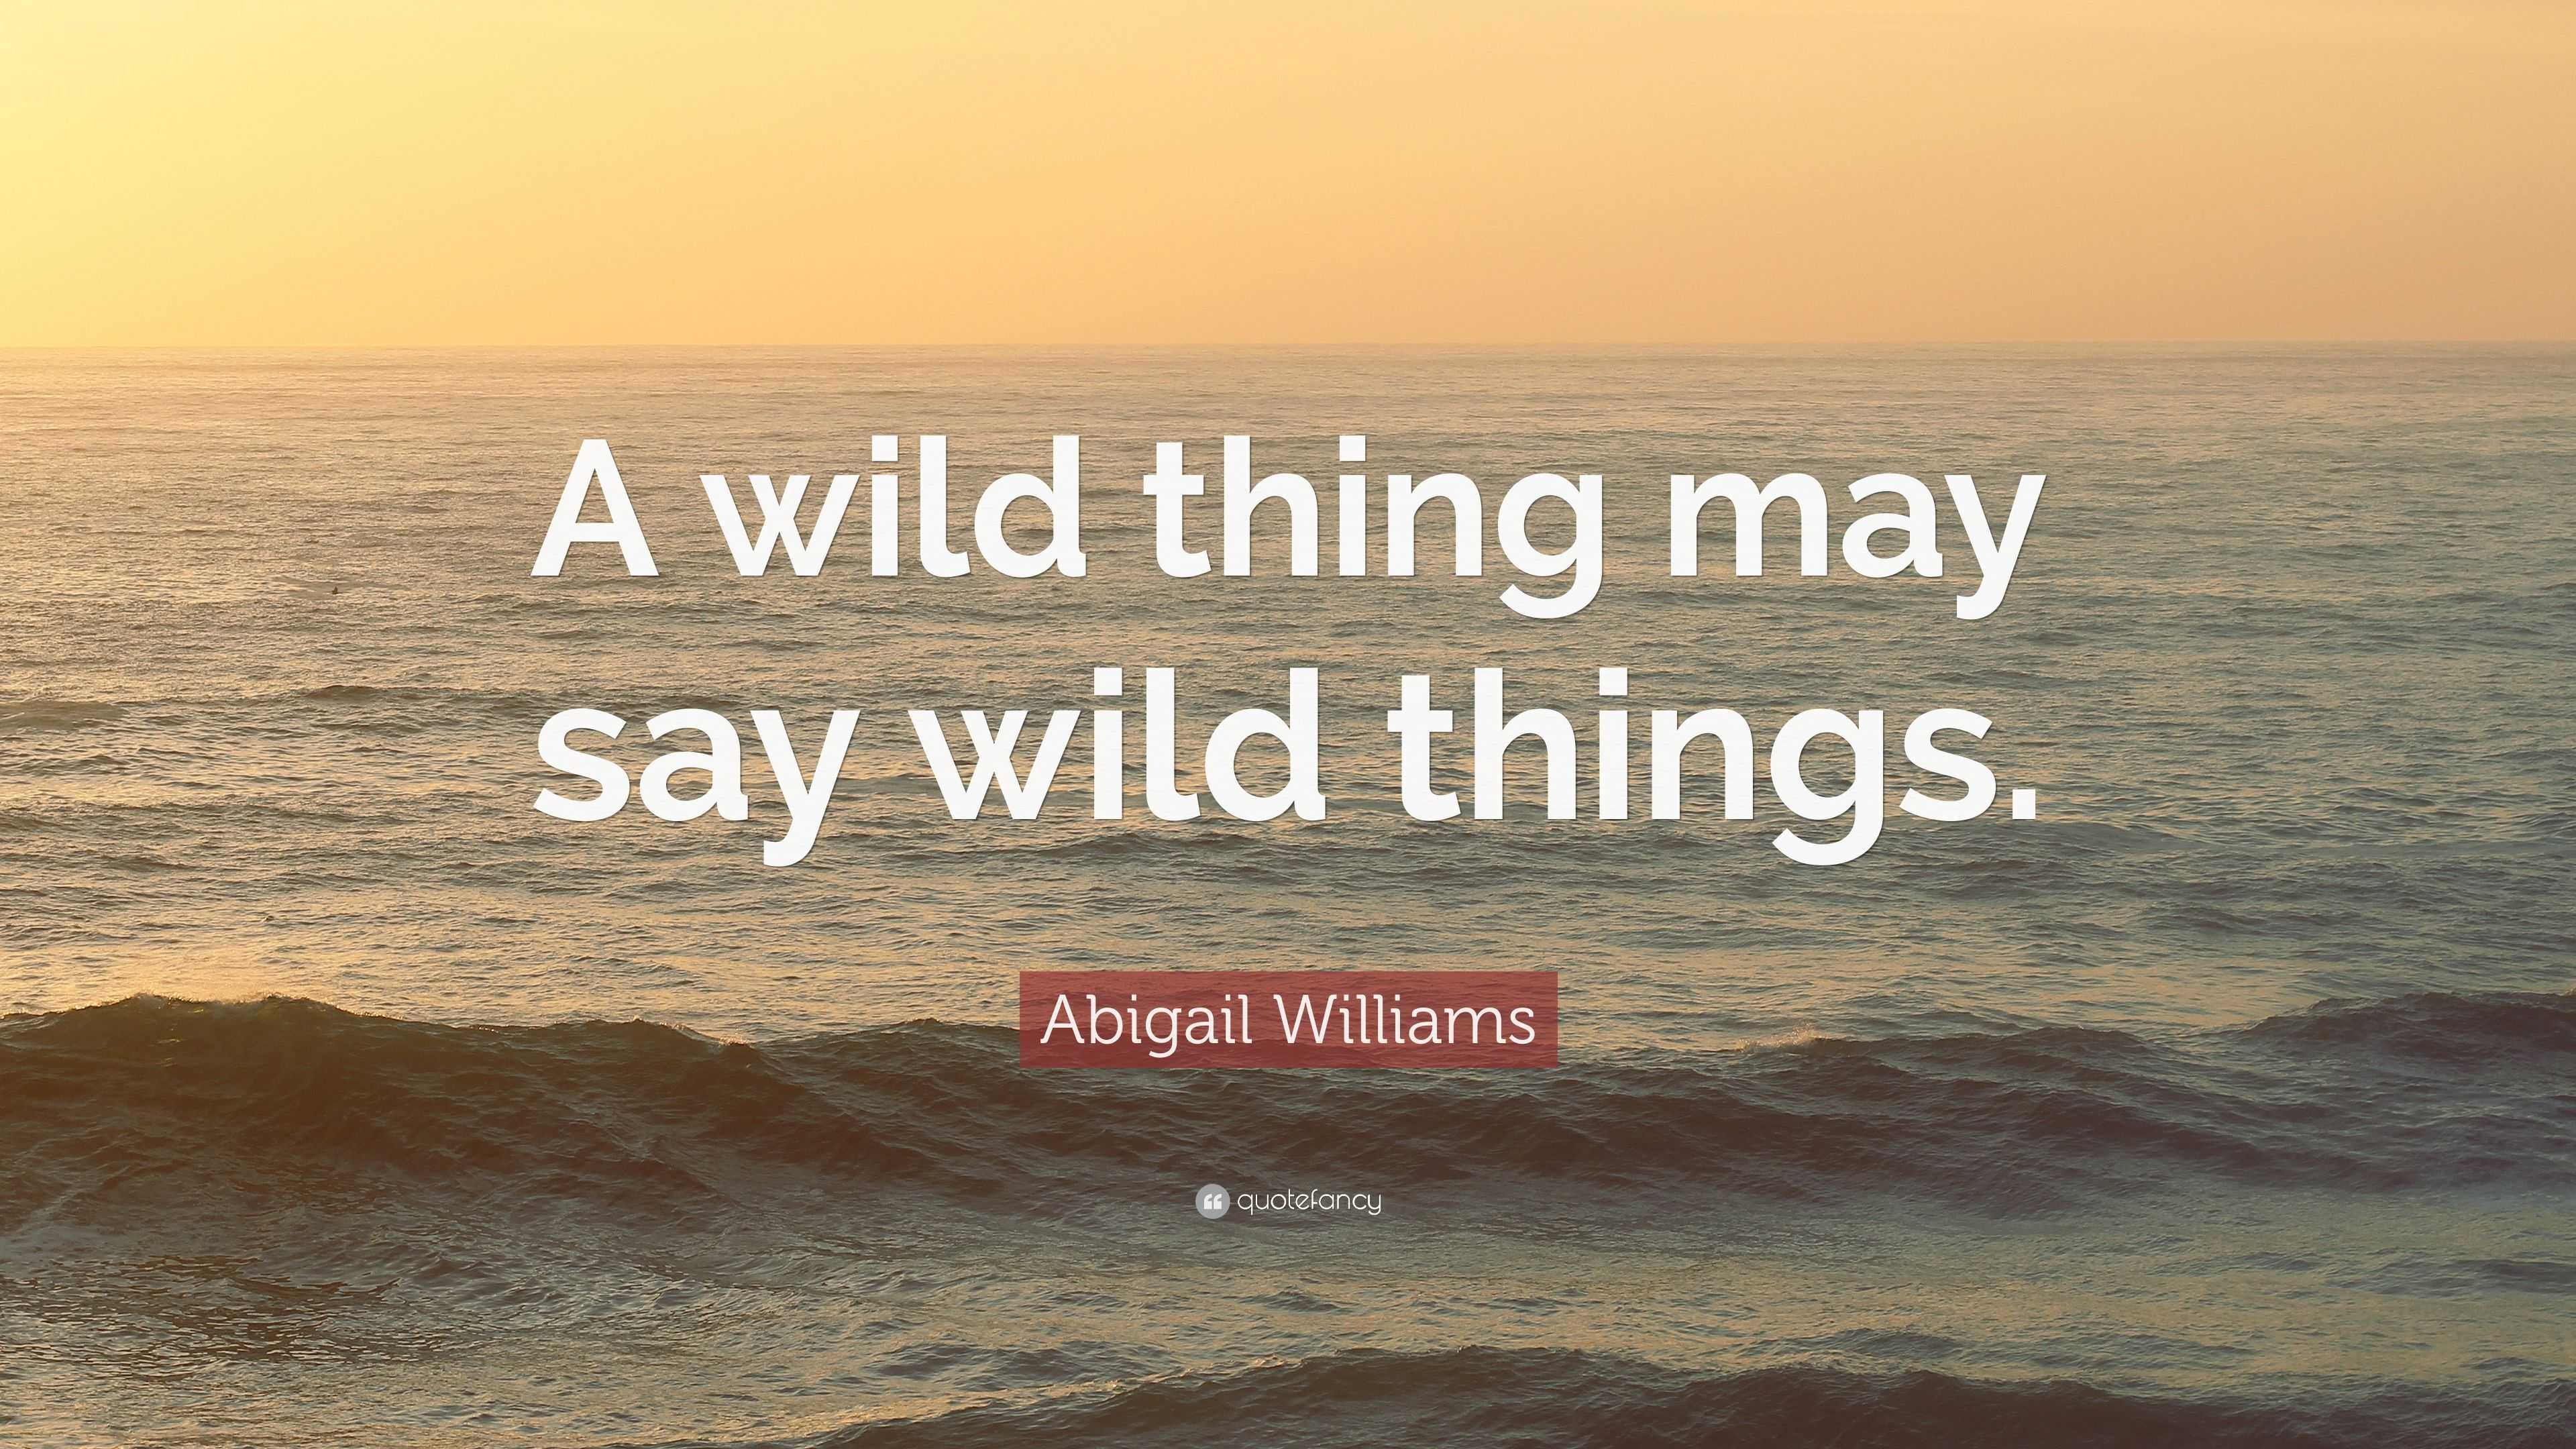 wild-thing-quote-where-the-wild-things-are-quotes-for-your-walls-and